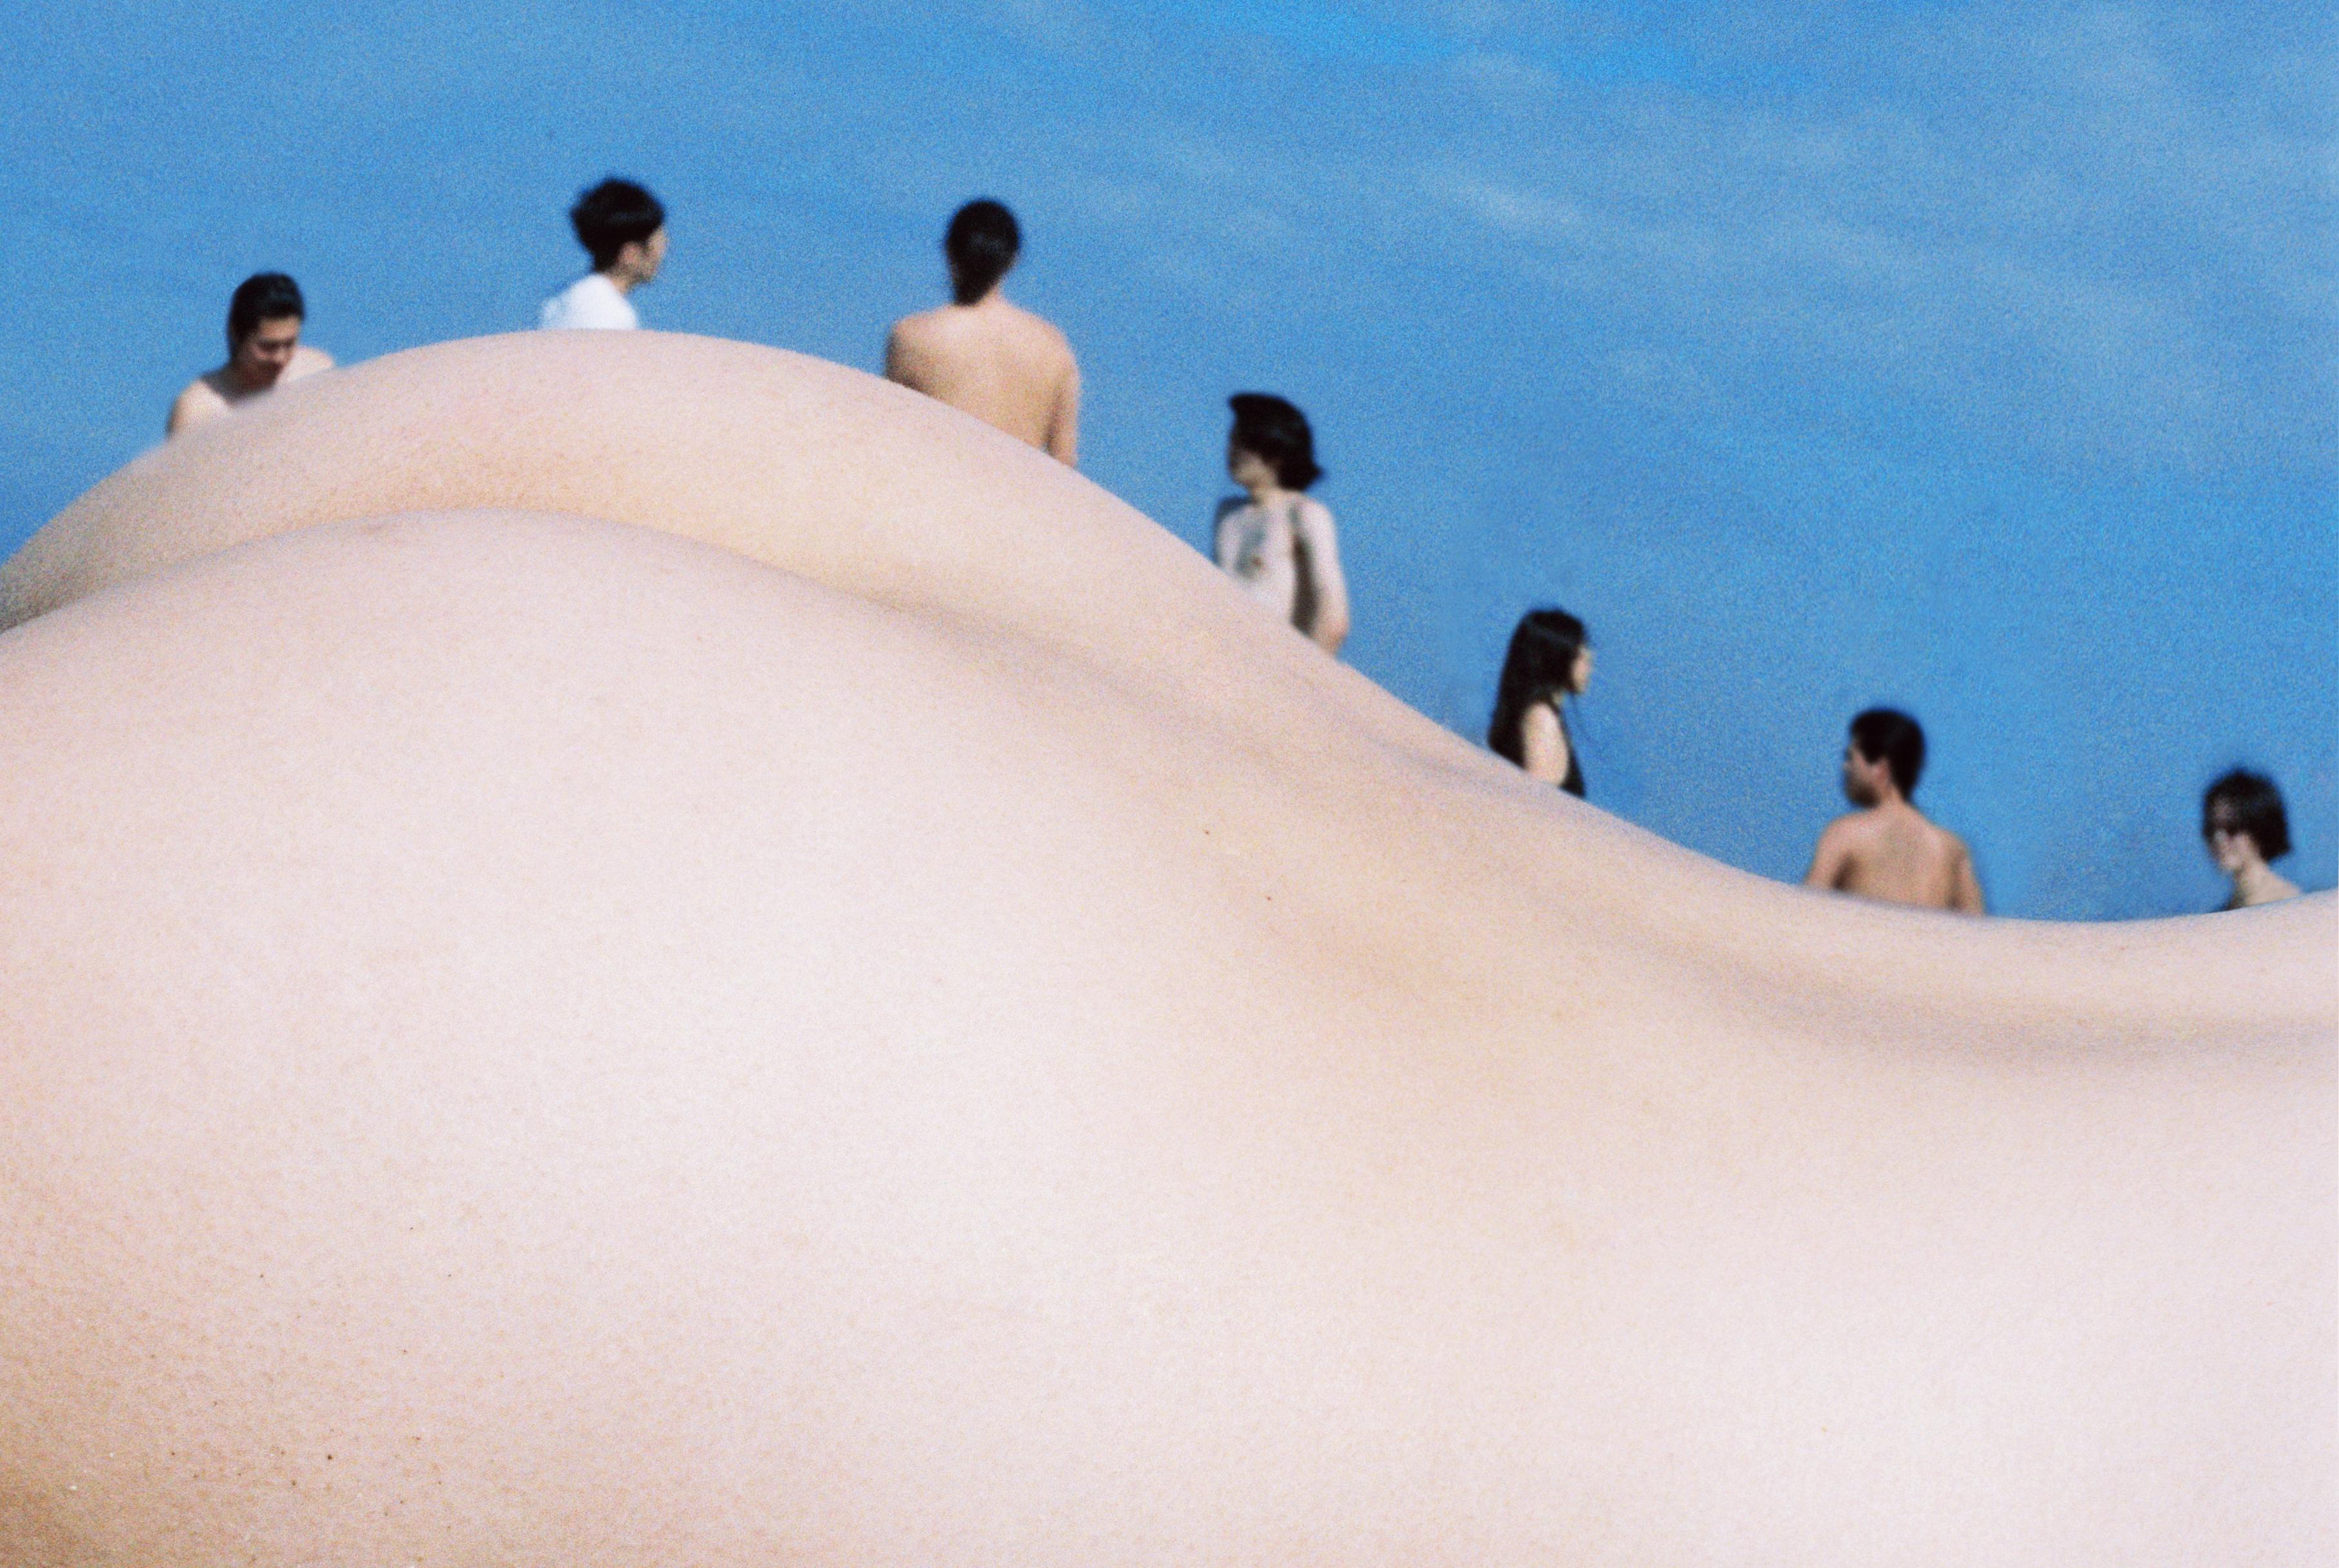 People on the beach 2 – John Yuyi, Nude, Human Figure, Photography, Abstract For Sale 4